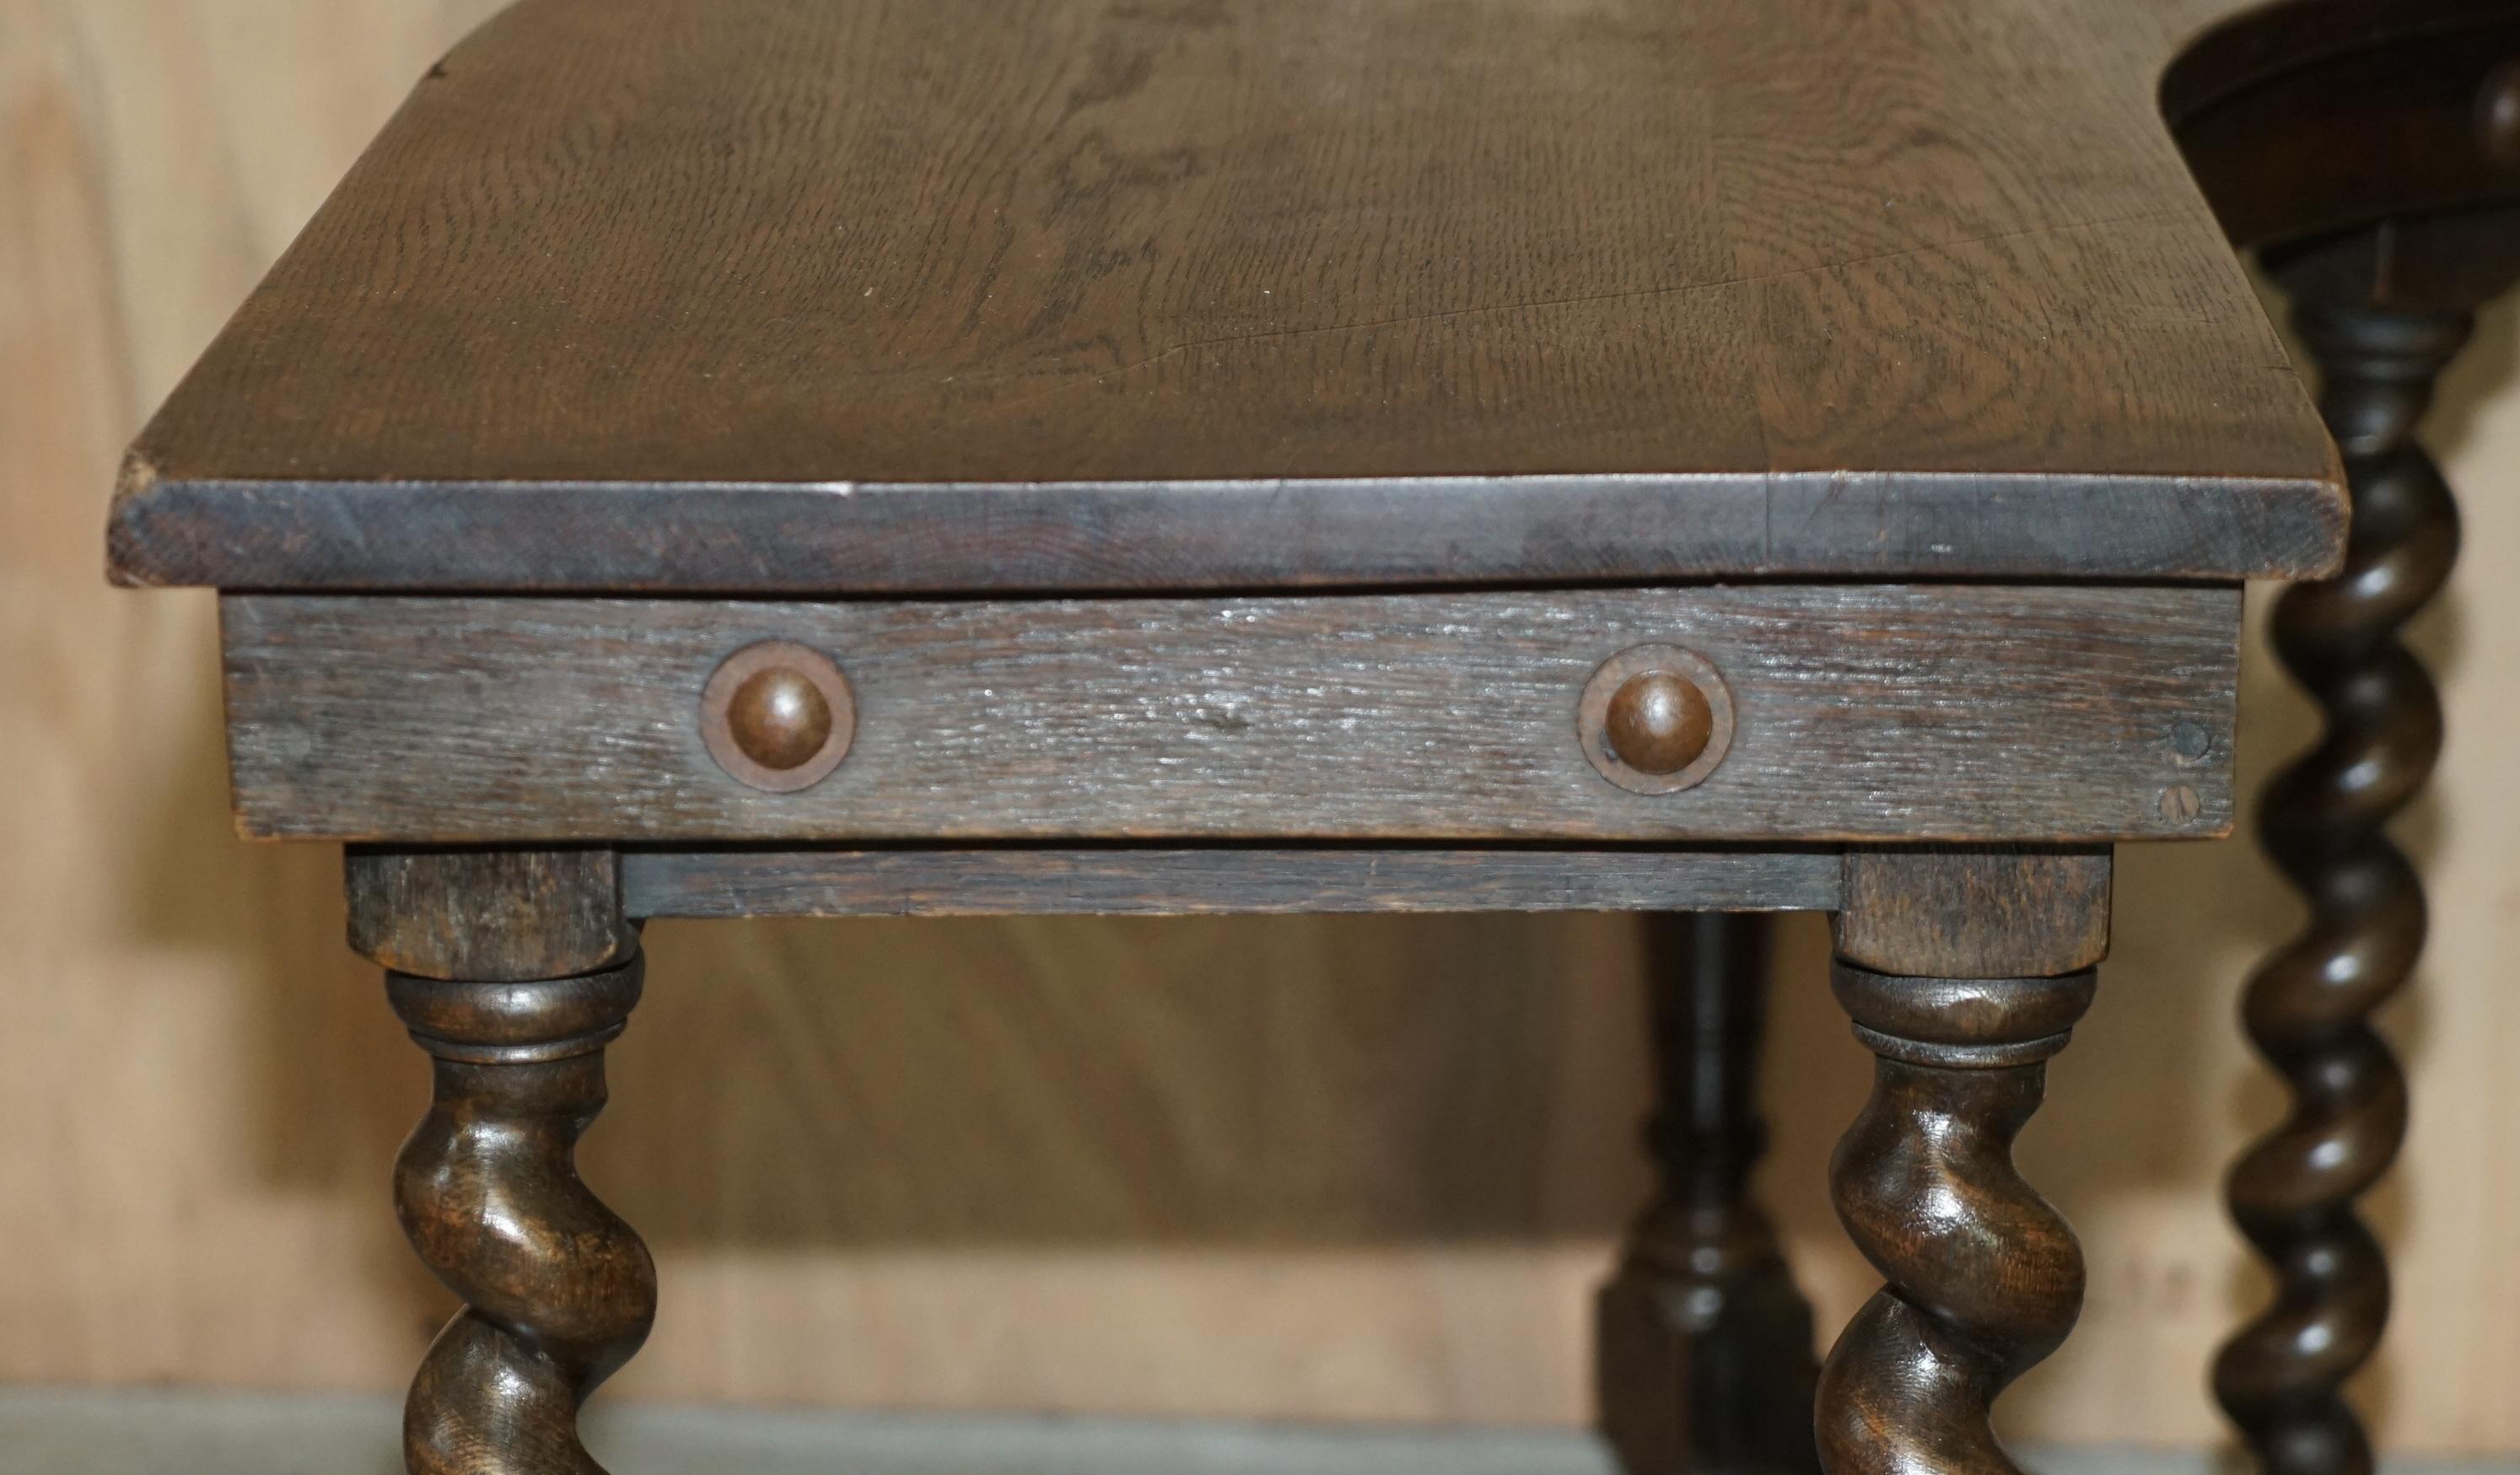 RARE & COLLECTABLE ANTIQUE JACOBEAN REVIVAL BARLEY TWiST LEG ENGLISH HUNT TABLE For Sale 7